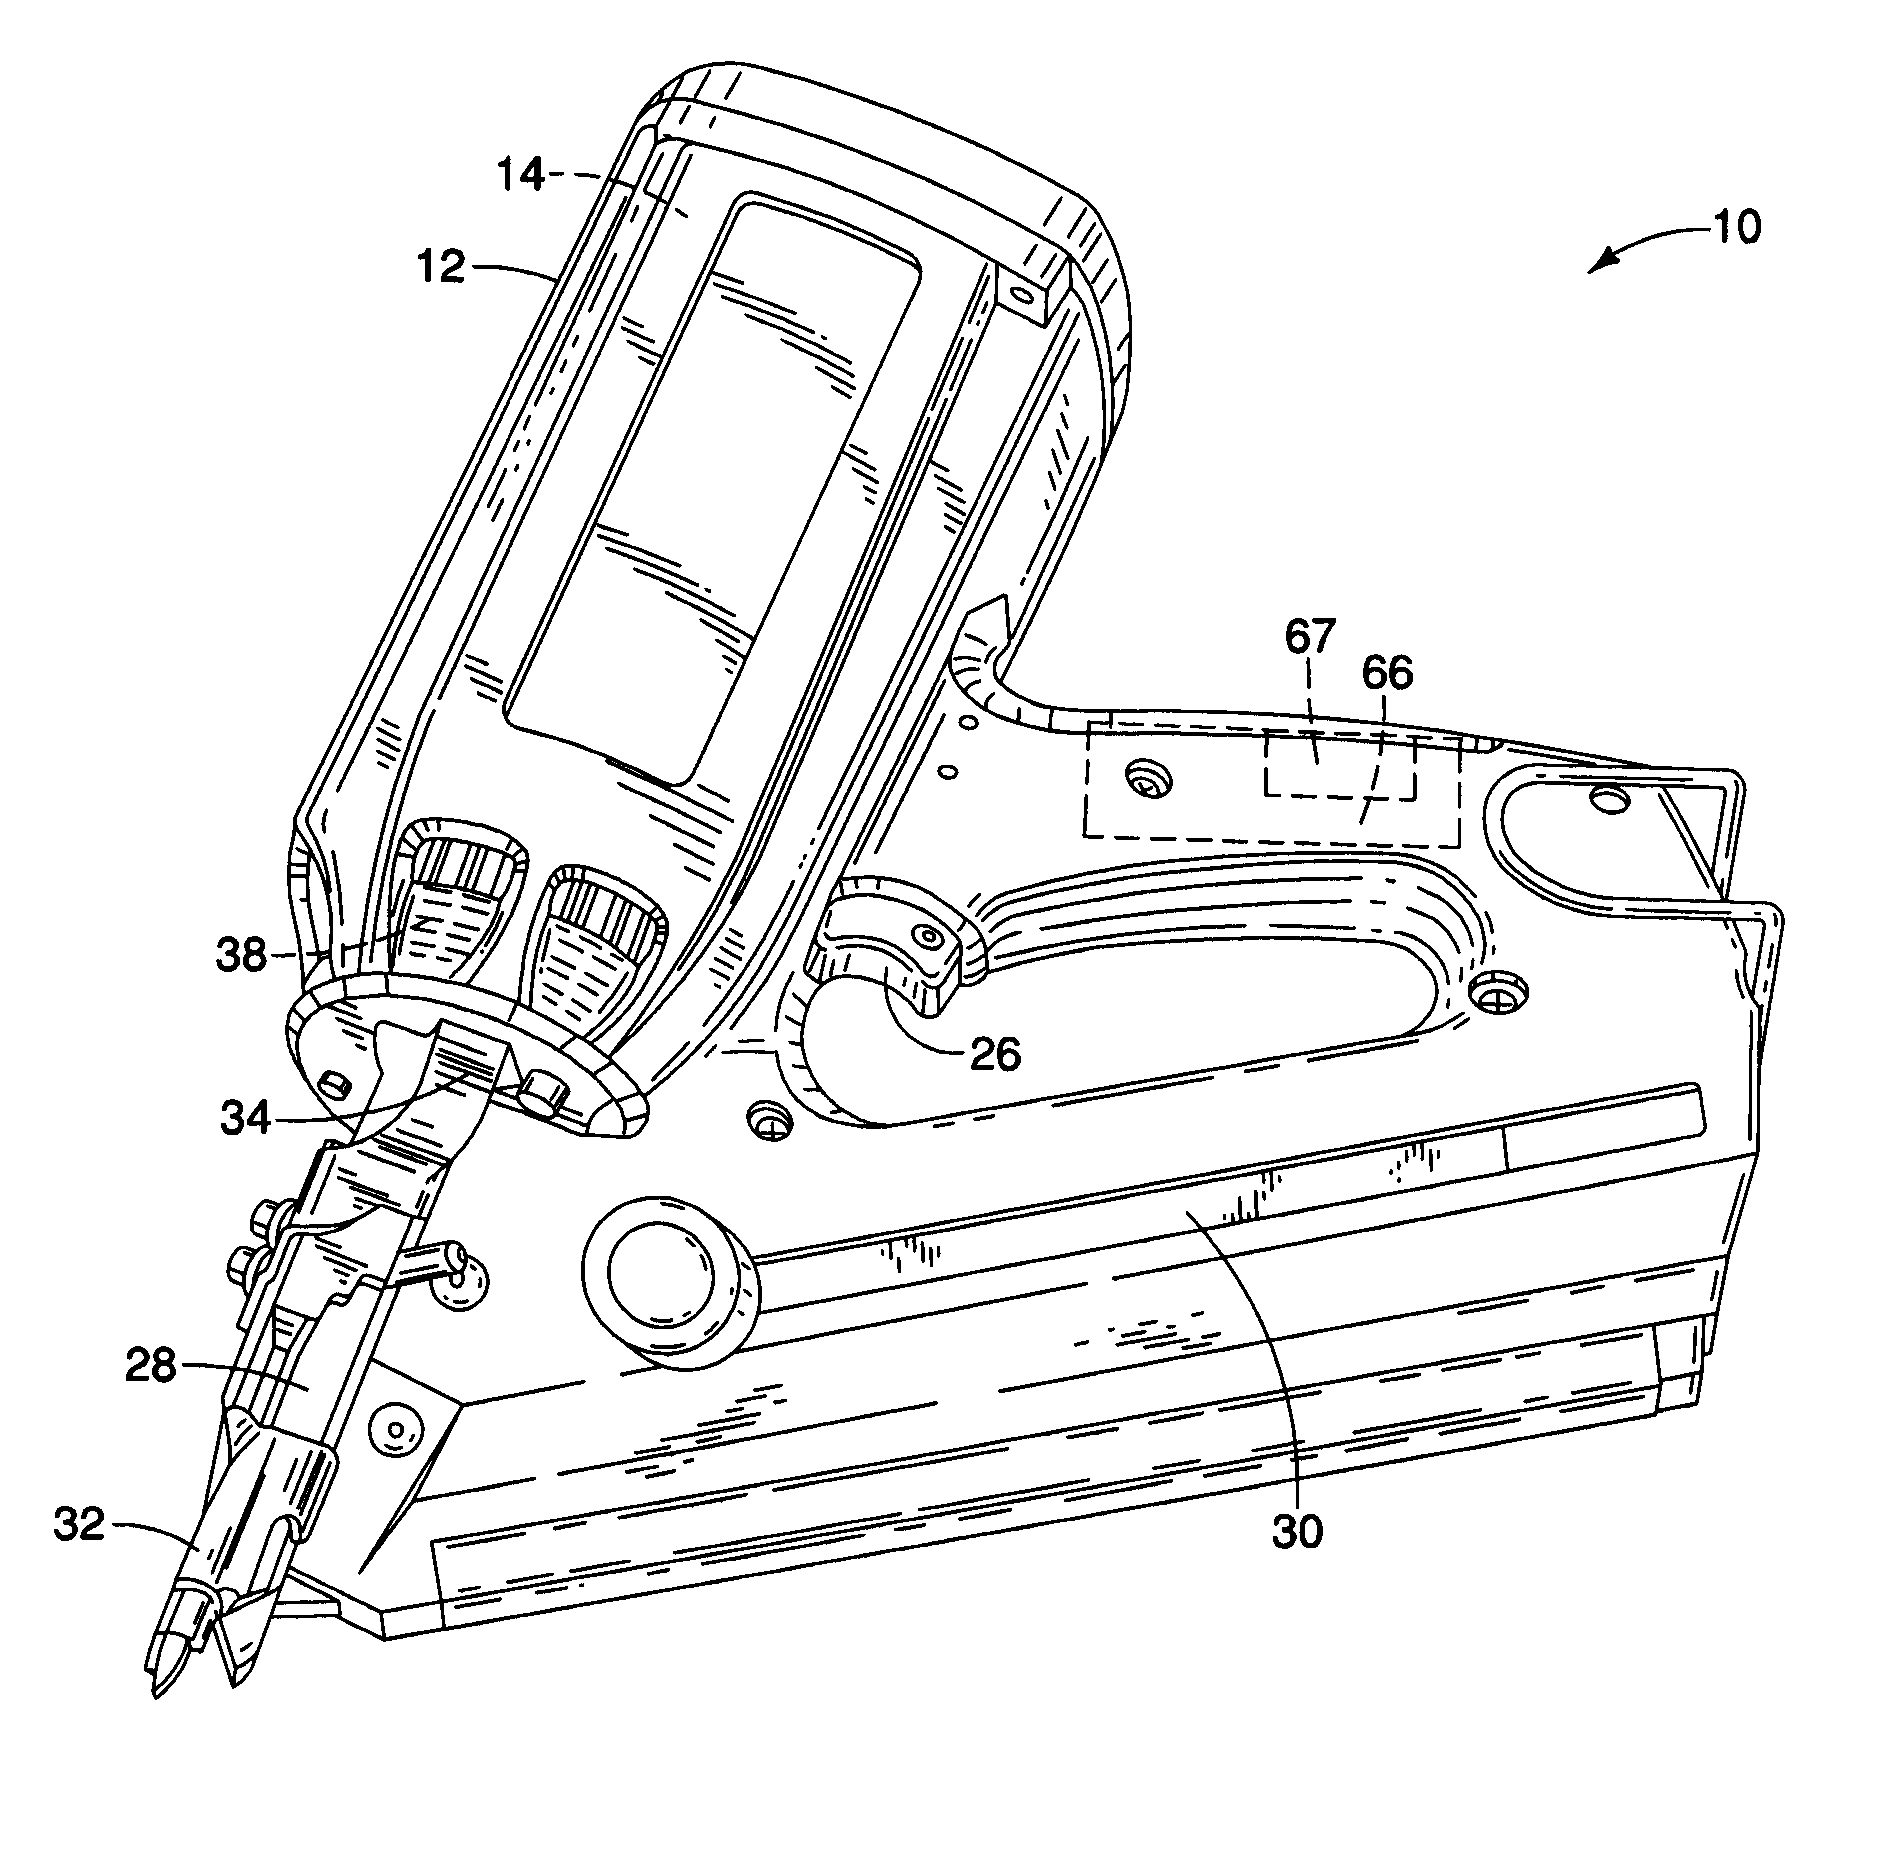 Fuel level monitoring system for combustion-powered tools